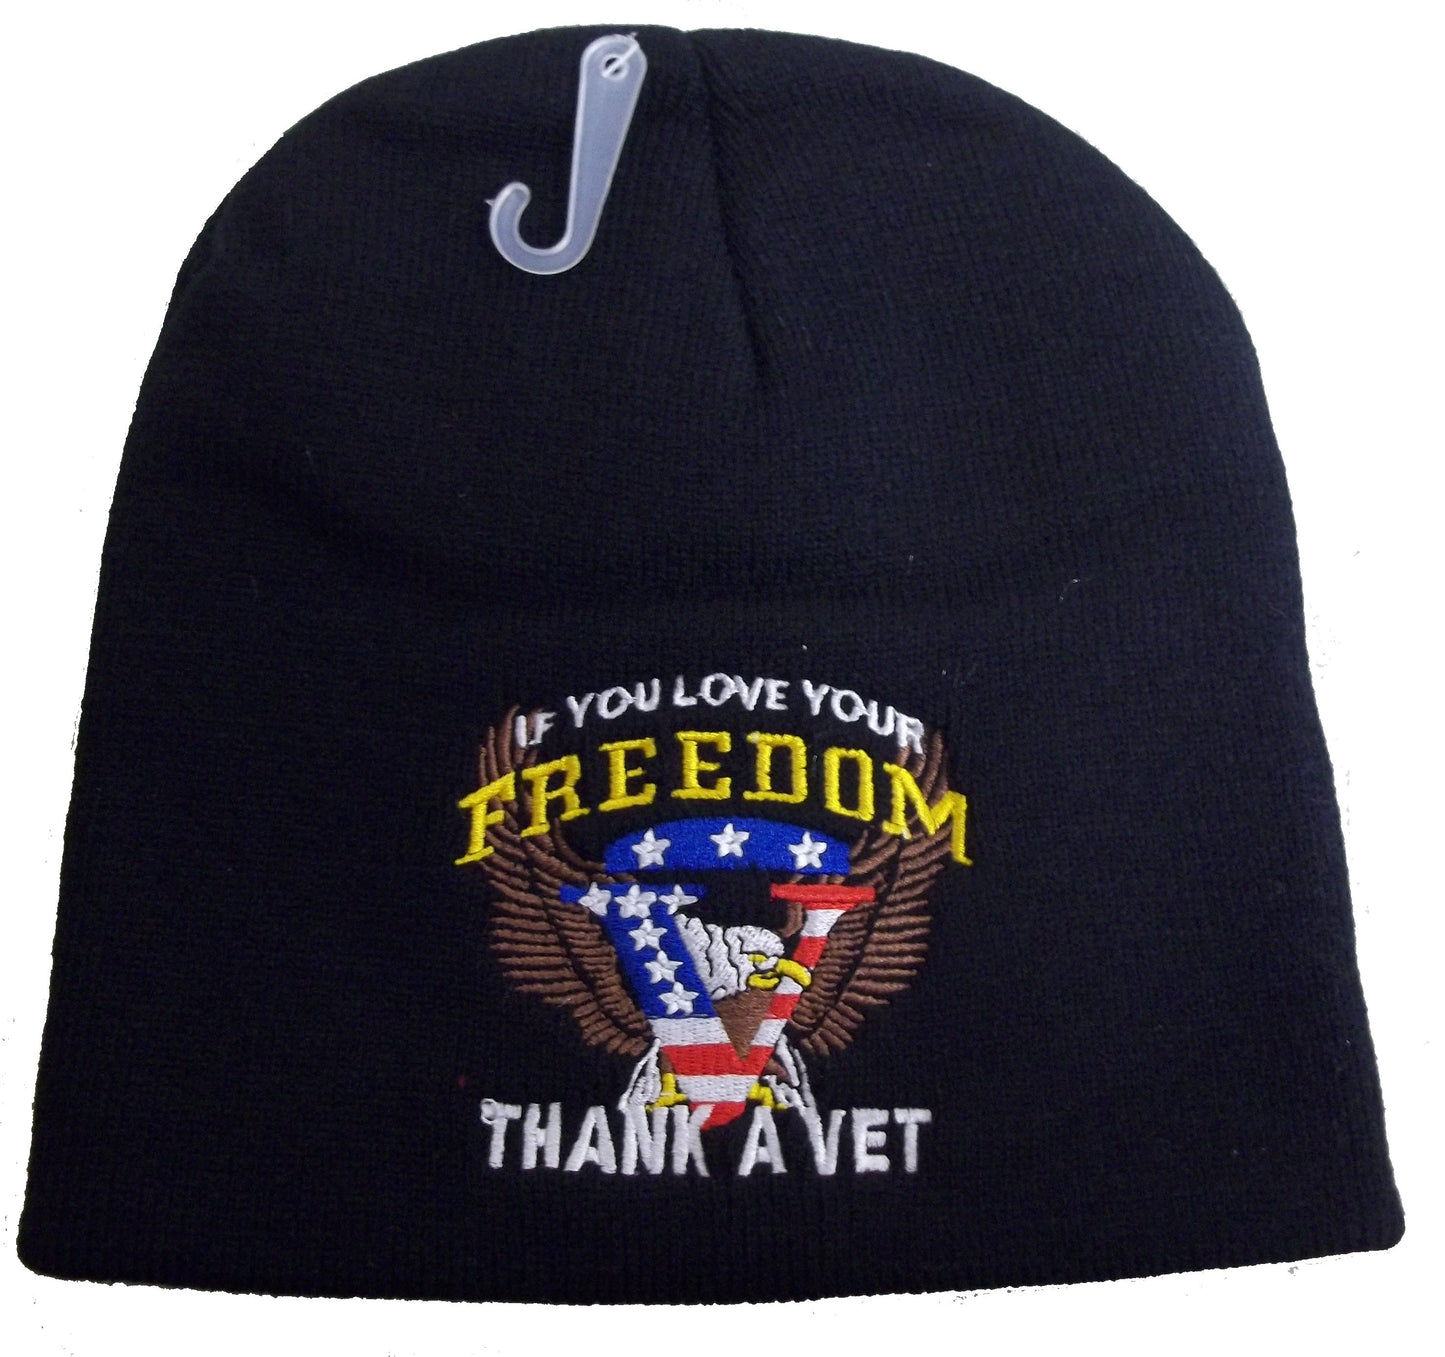 8" IF YOU LOVE YOUR FREEDOM THANK A VET BEANIE HAT veteran cap skull usa flag eagle military